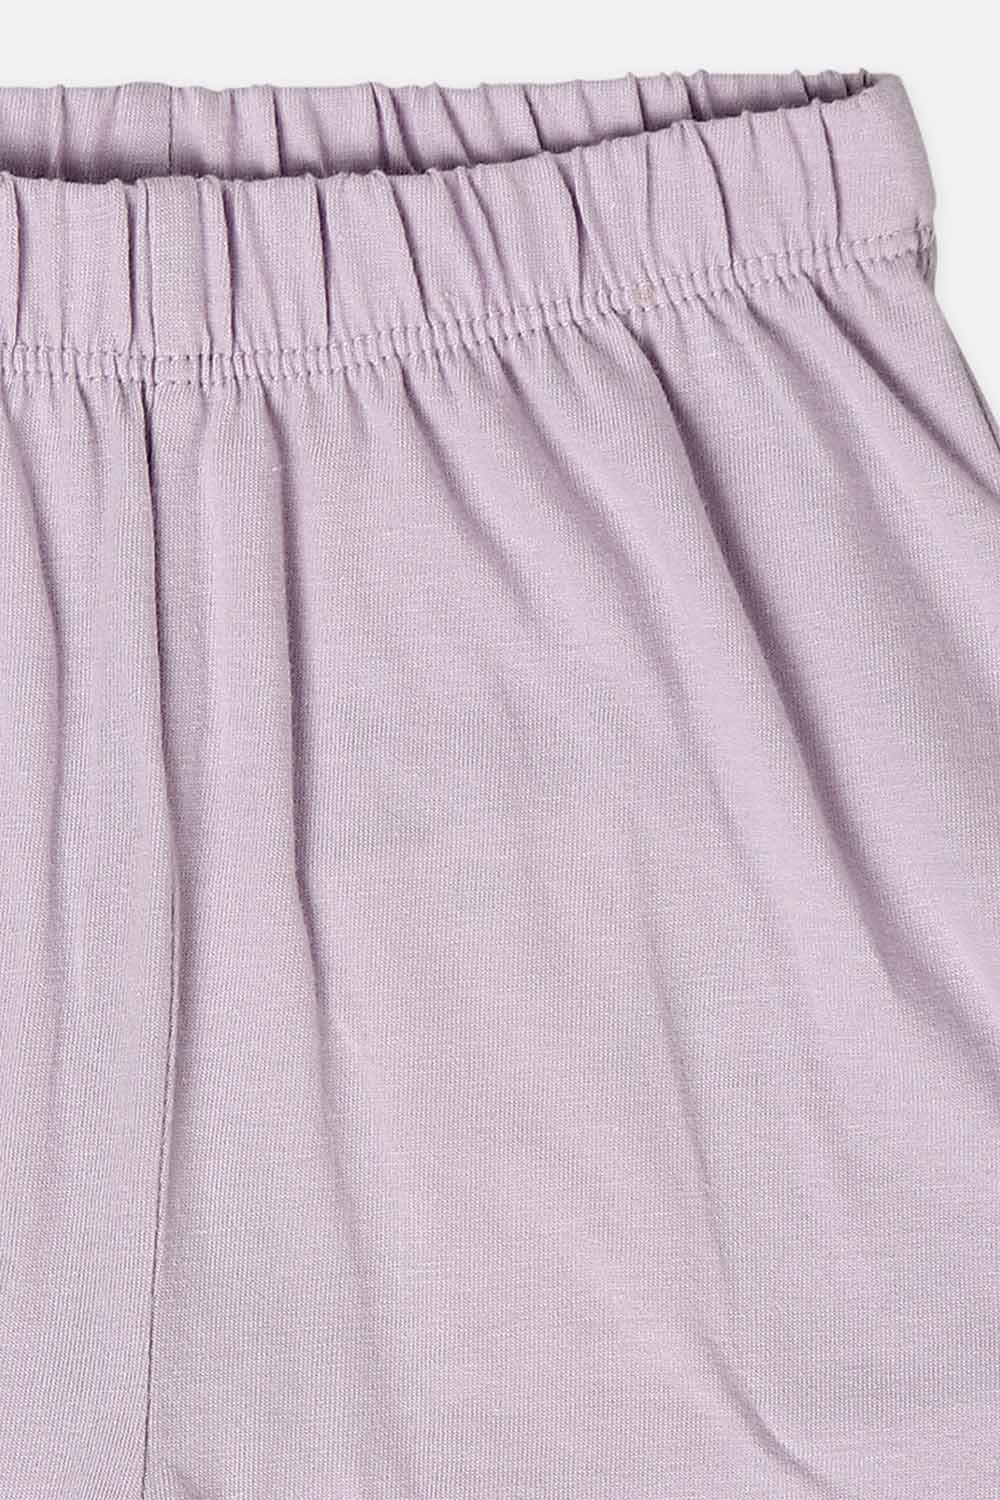 Oh Baby Comfy Pant Lavender-Tr10